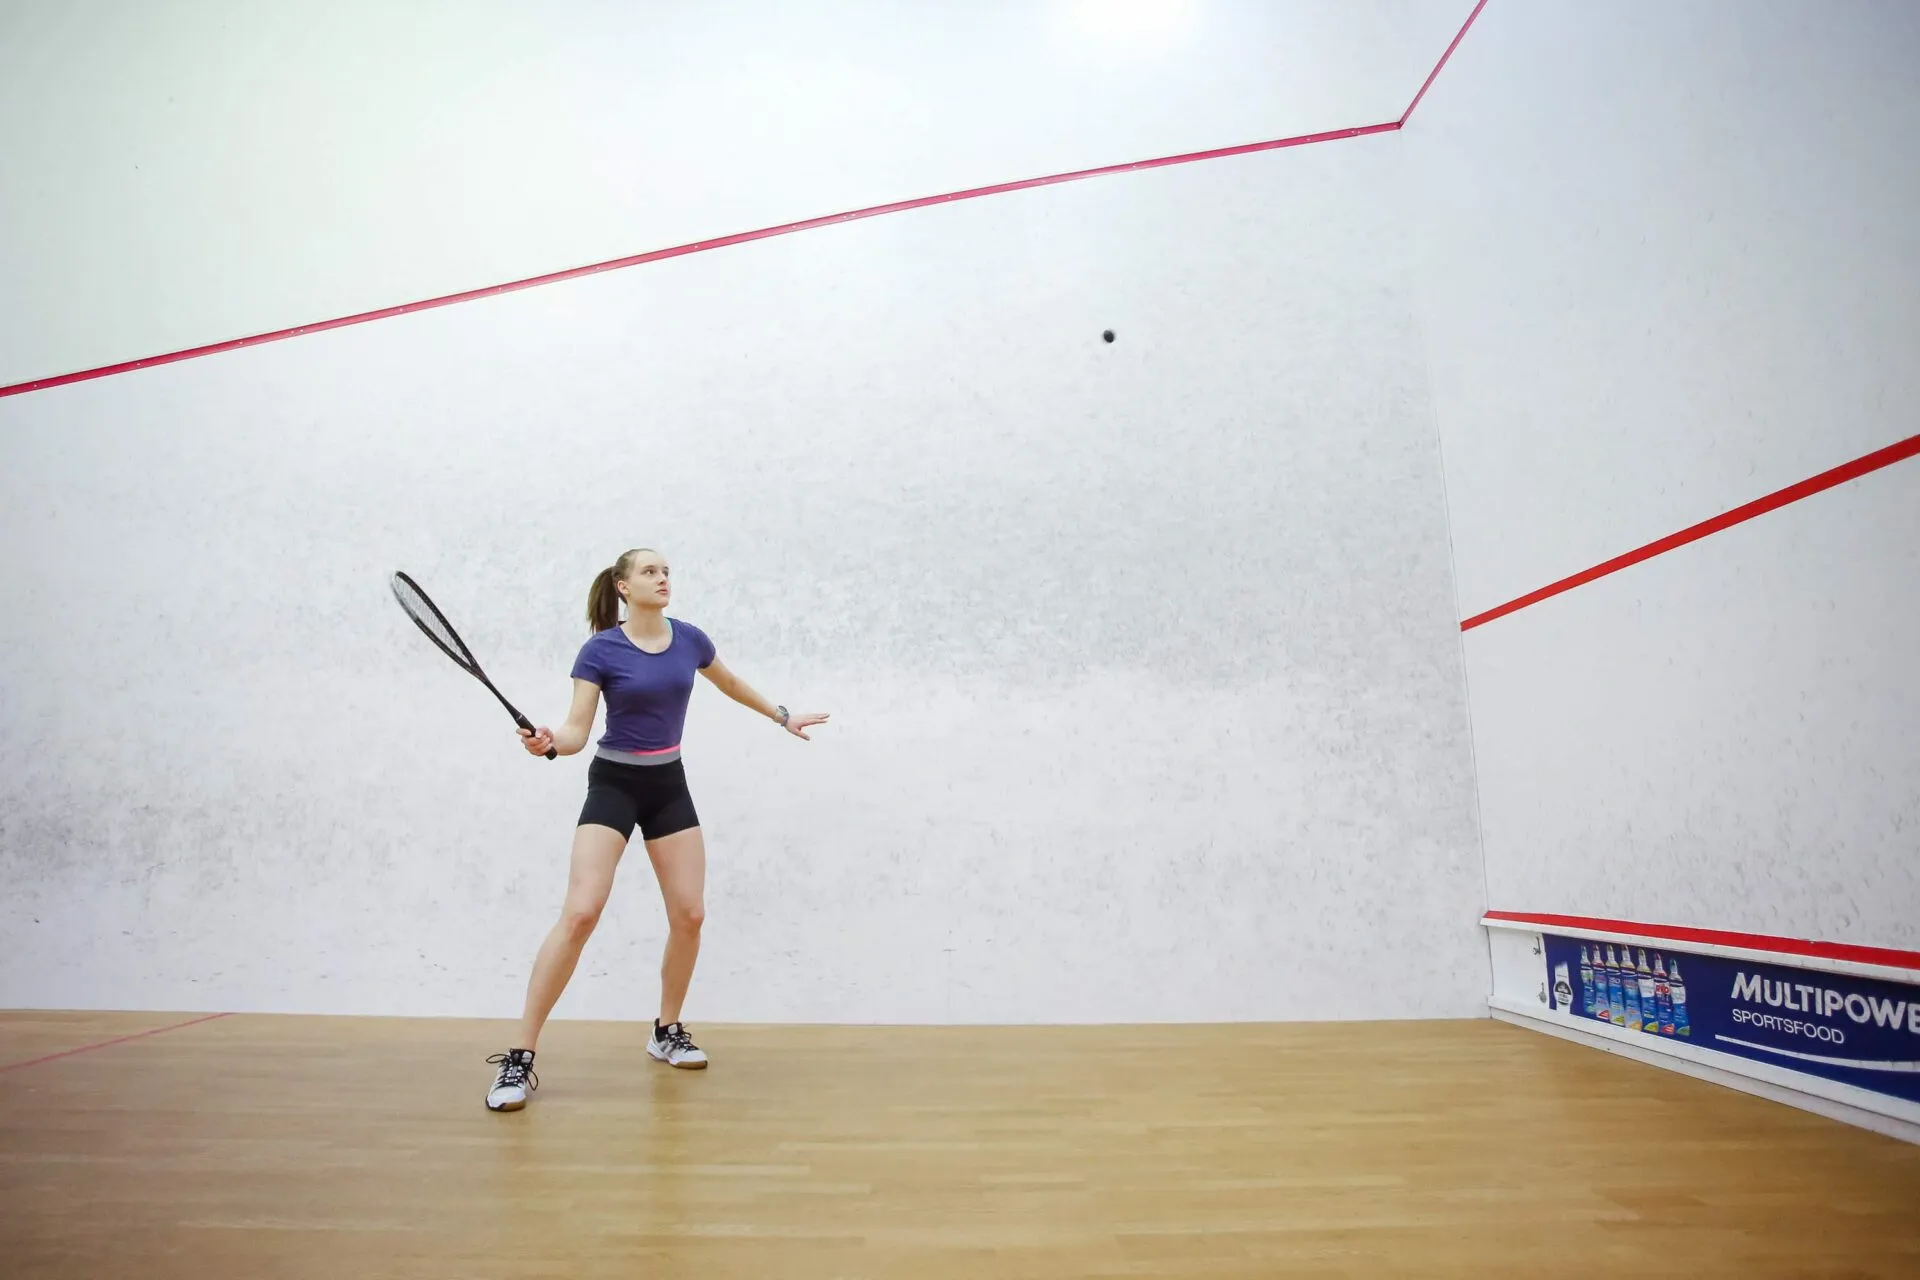 First Fitness & Squash Tower in Croatia, Europe | Squash - Rated 6.4